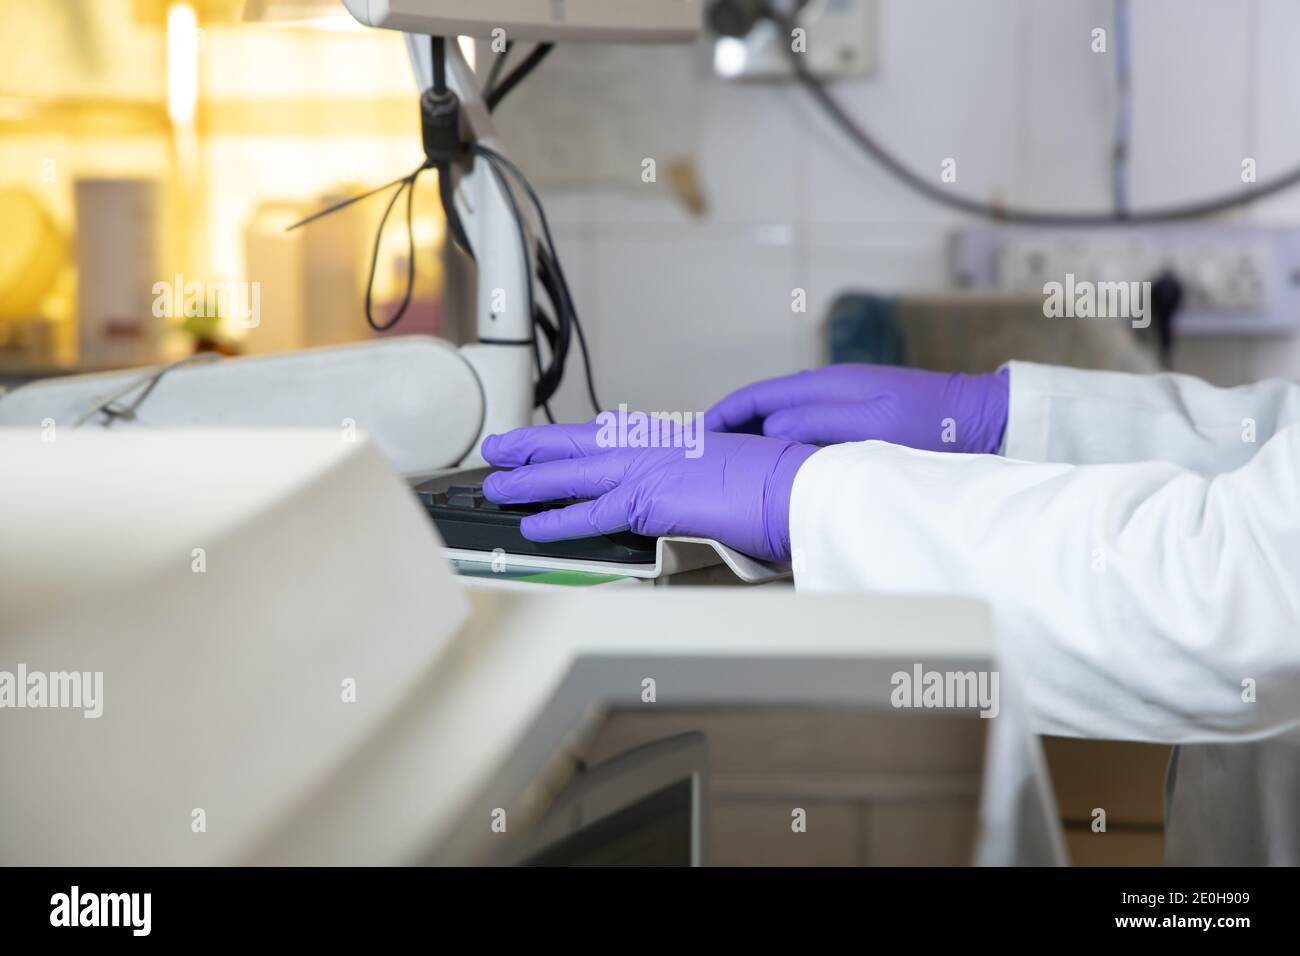 Closup of doctor or medical worker wearing gloves typing on computer keyboard at hospital. Background, copy space. Stock Photo